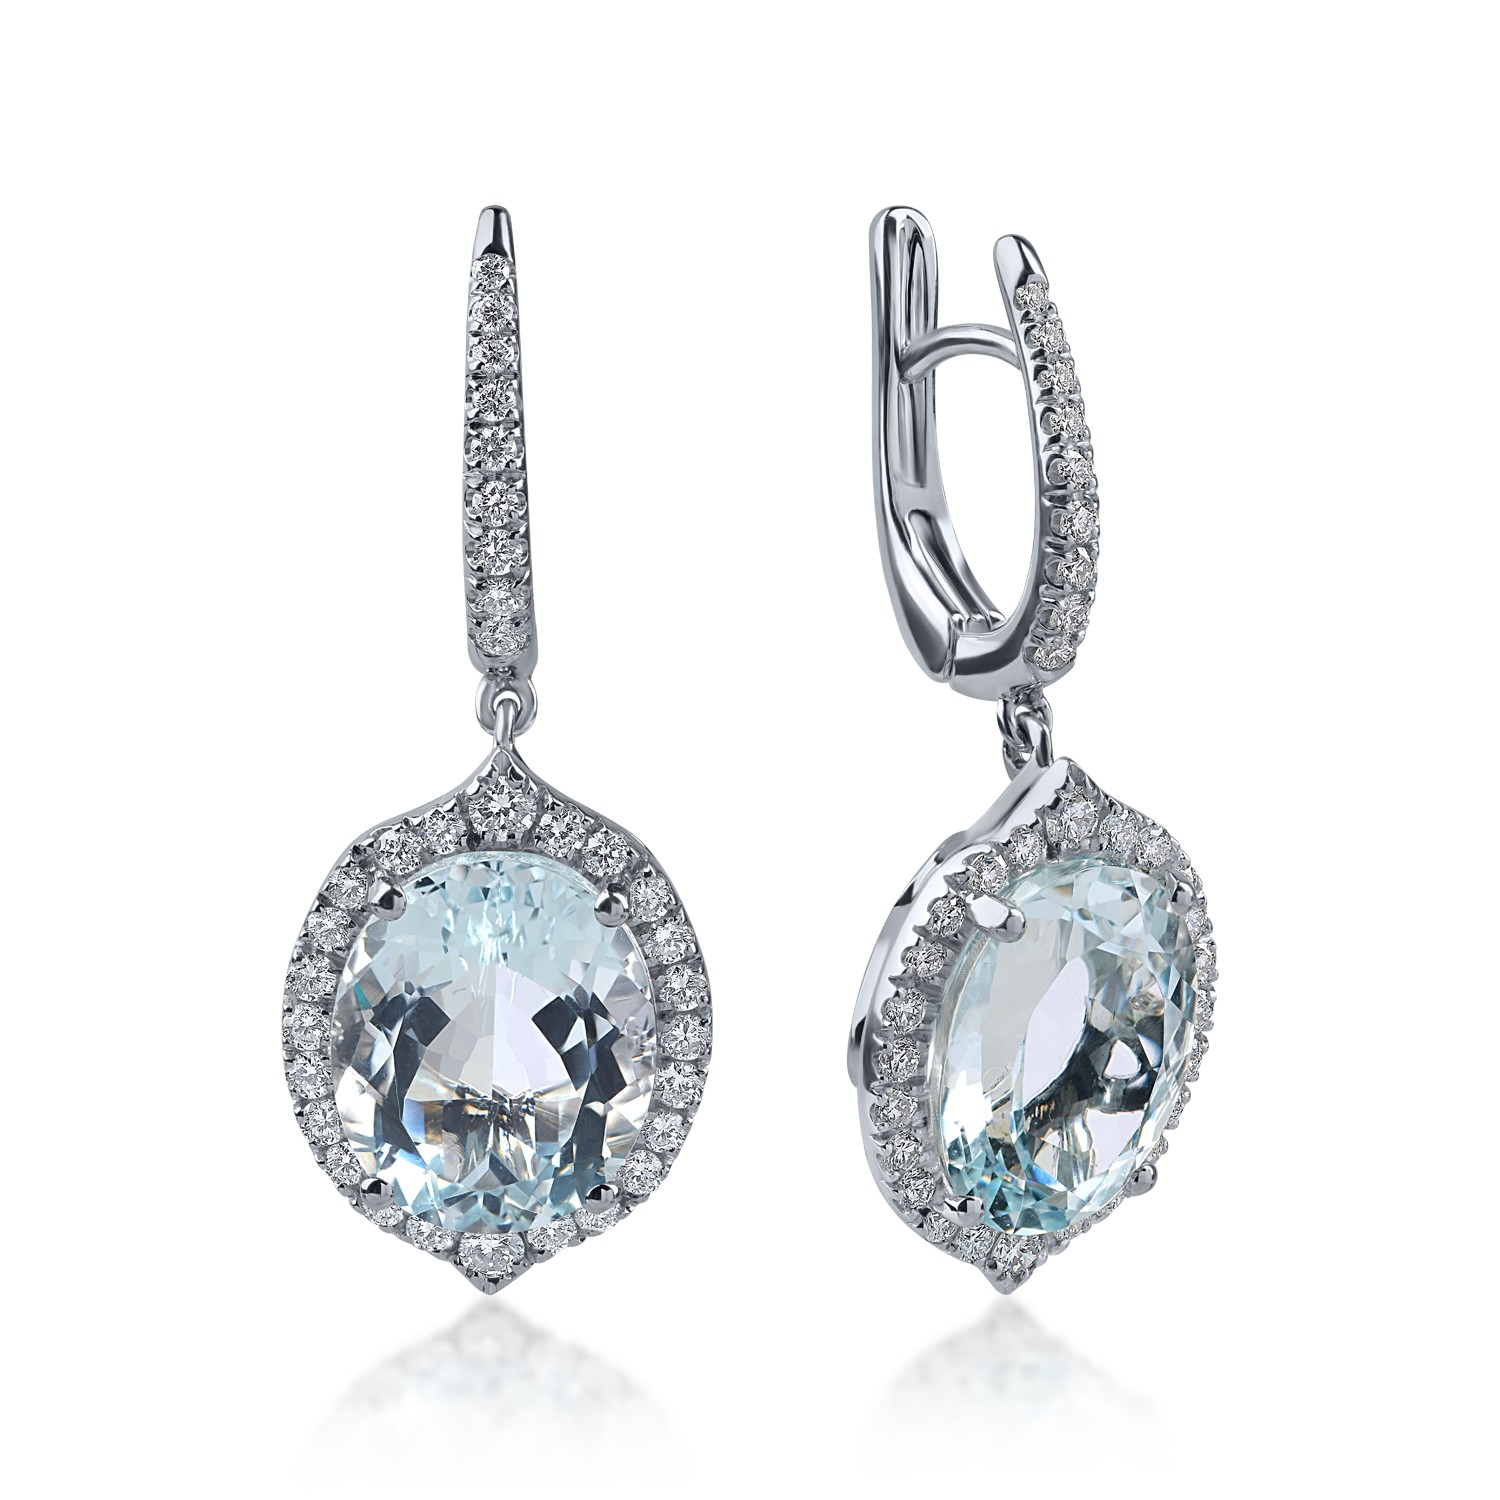 White gold earrings with 6.94ct aquamarines and 0.66ct diamonds